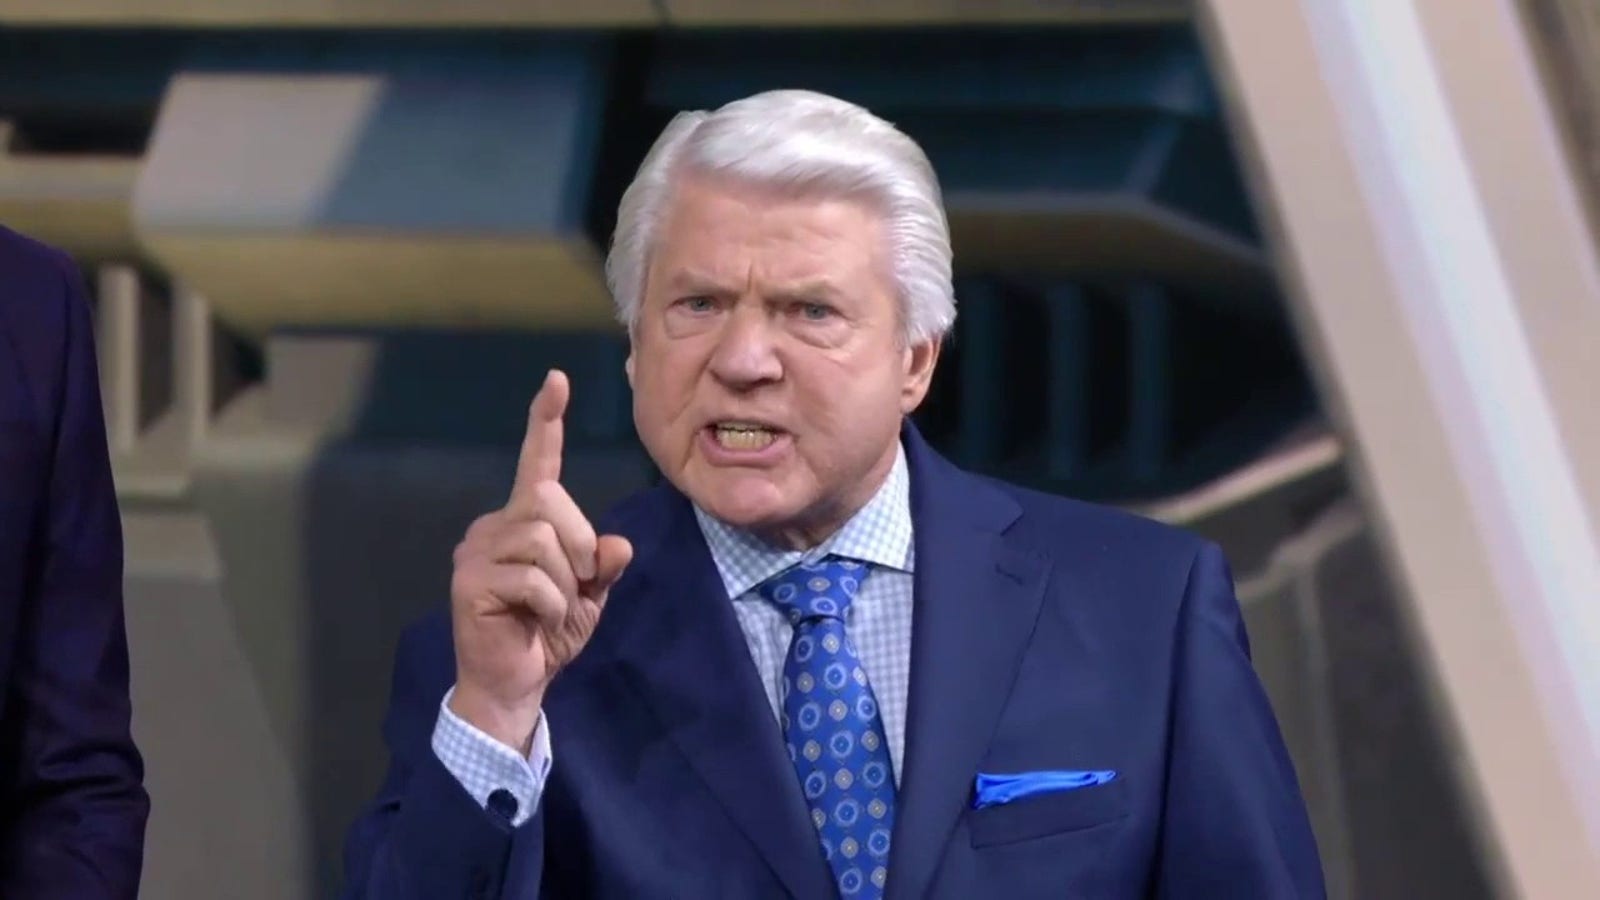 Jimmy Johnson is FIRED UP about the Cowboys' lackluster first half against the Packers